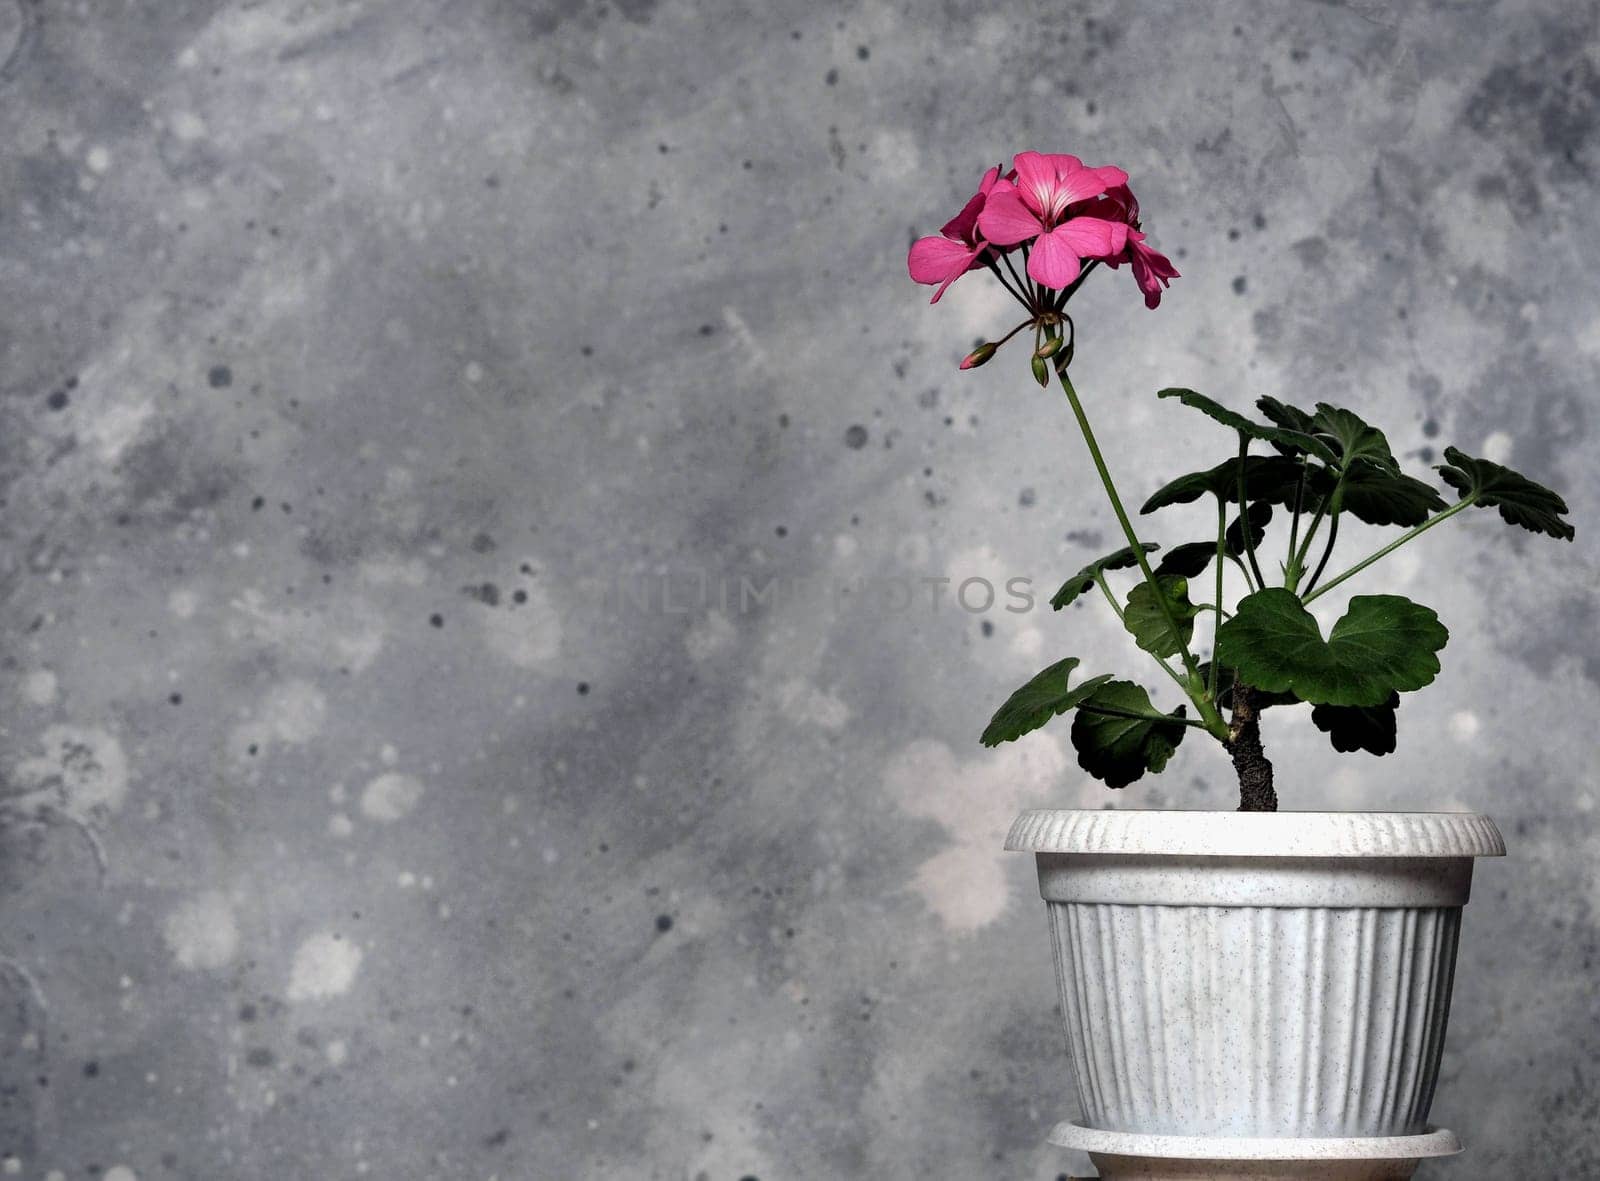 A small home plant of geranium or pelargonium with a pink flower in a flower pot on a gray background. Herbal or medicinal theme. by TatianaPink